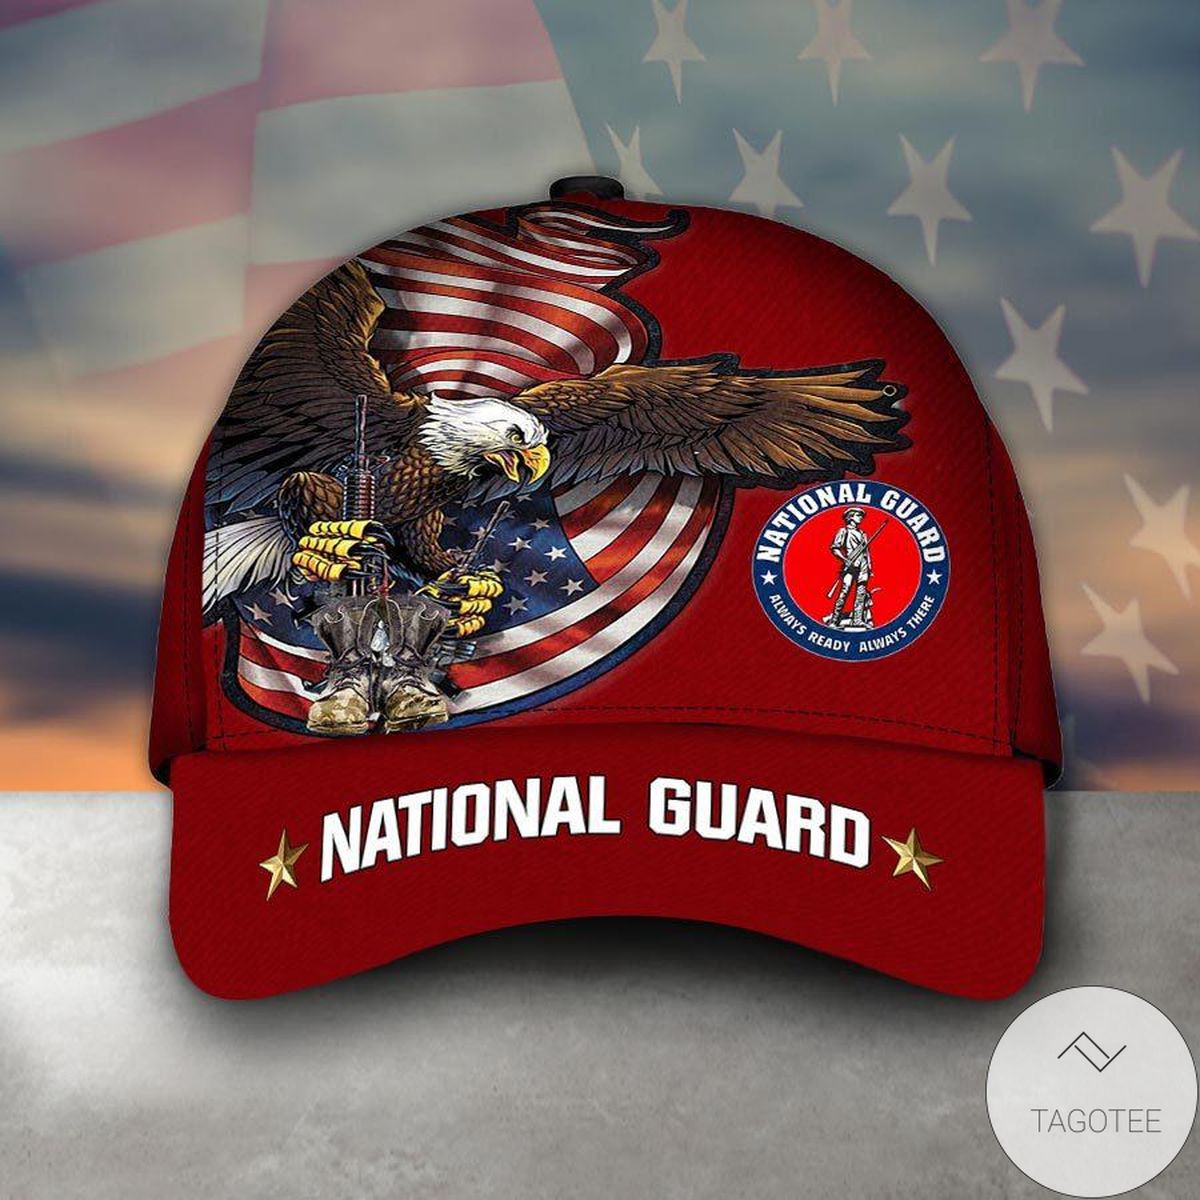 Armed Forces National Guard Veteran Military Soldier Cap